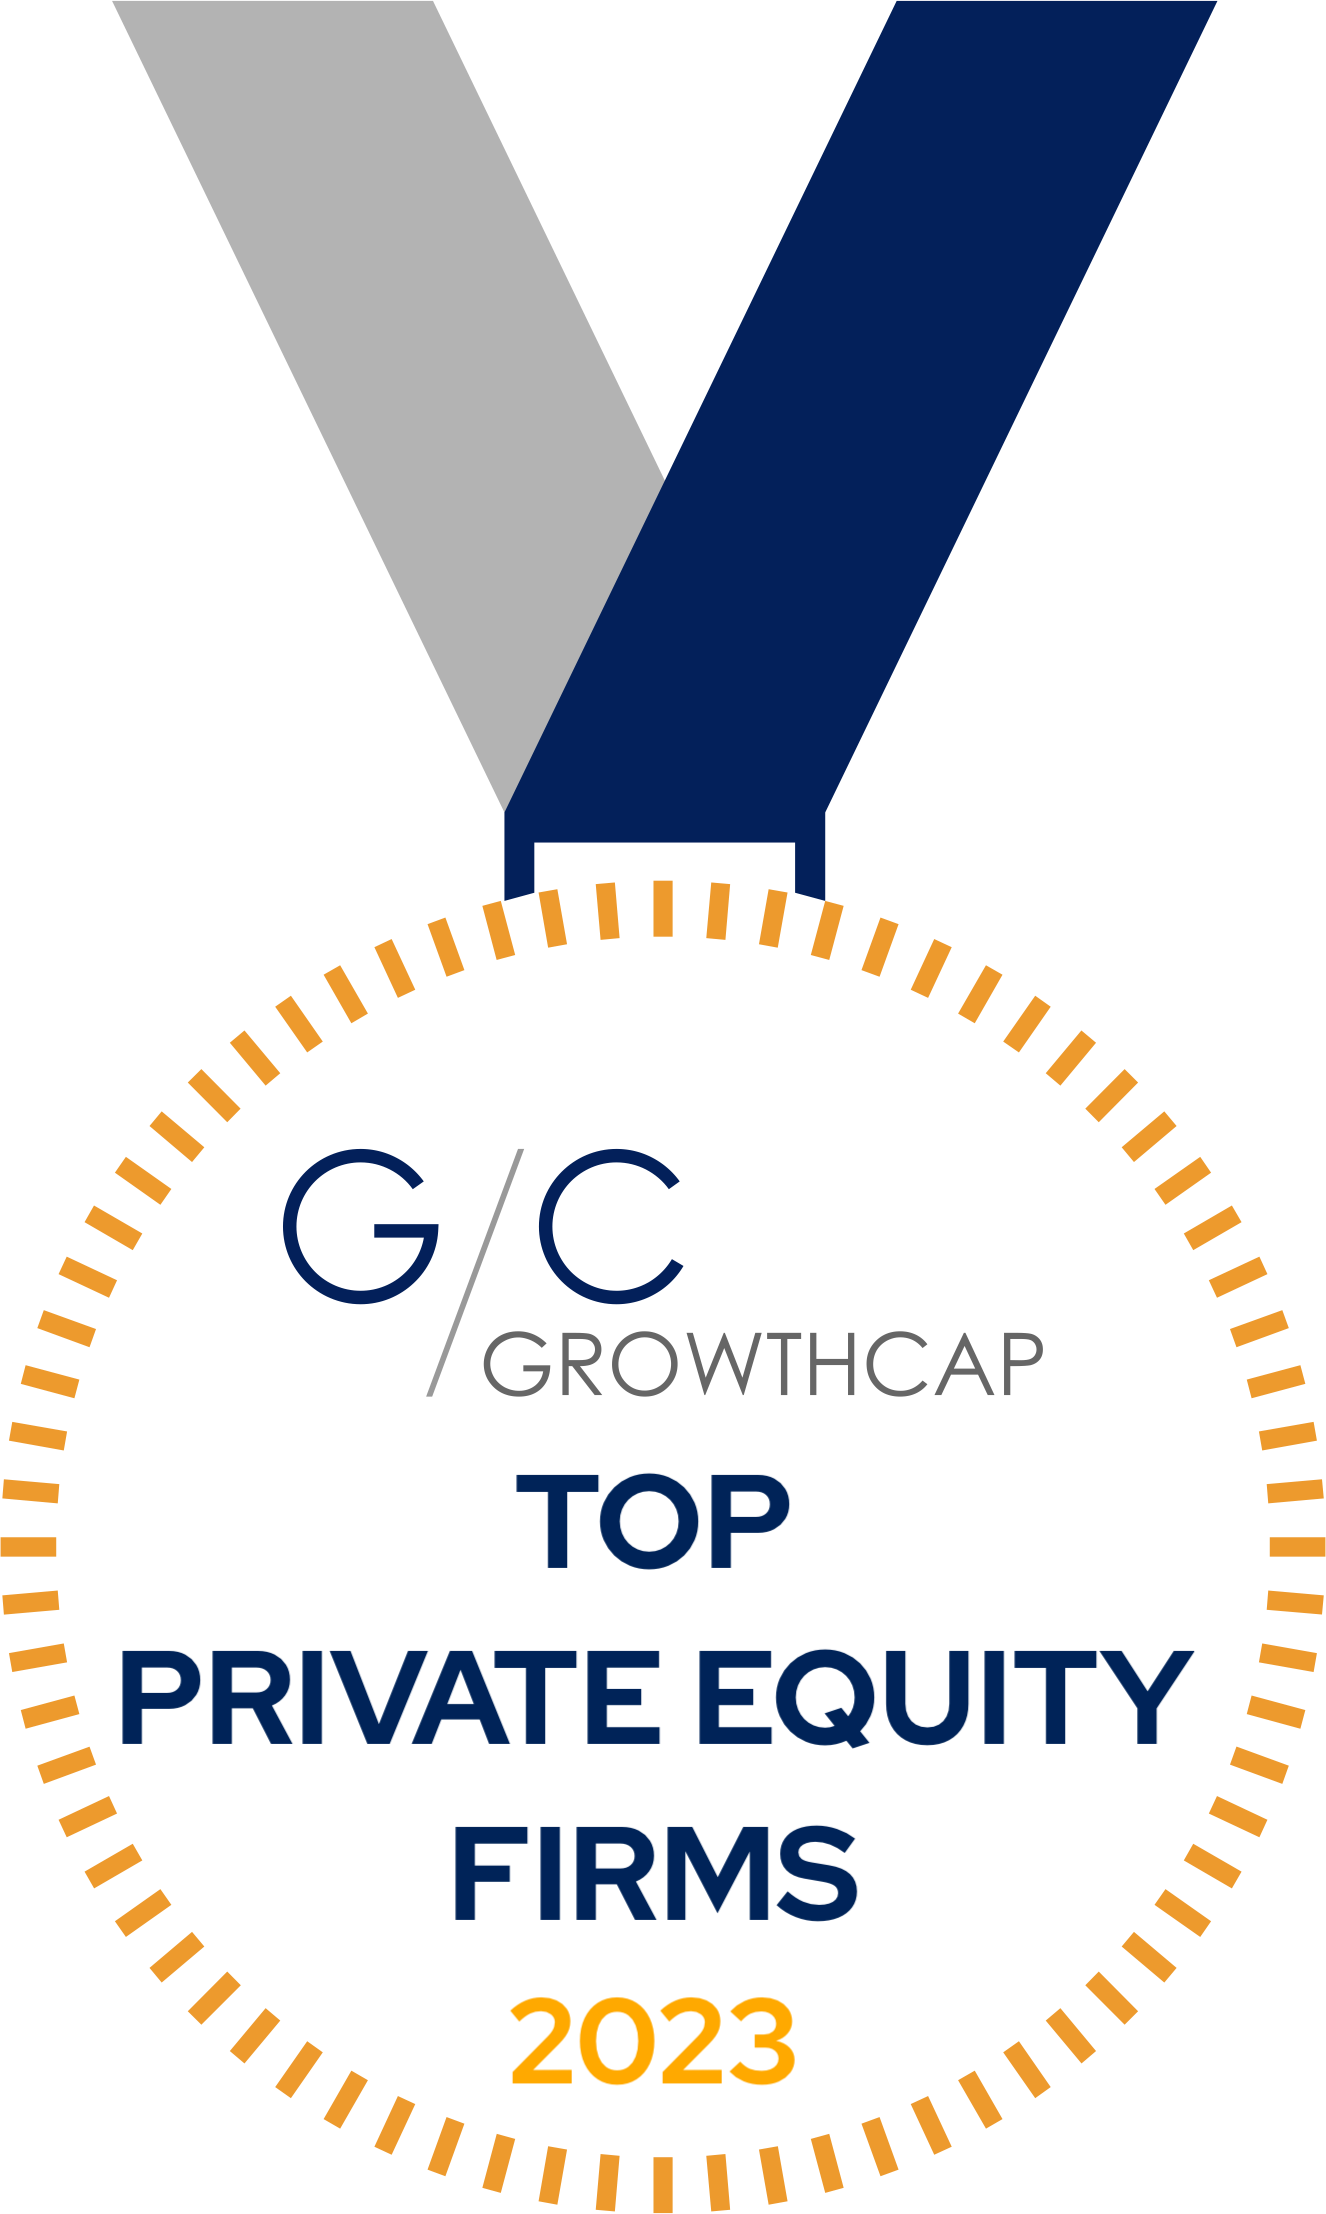 The Top Private Equity Firms of 2023